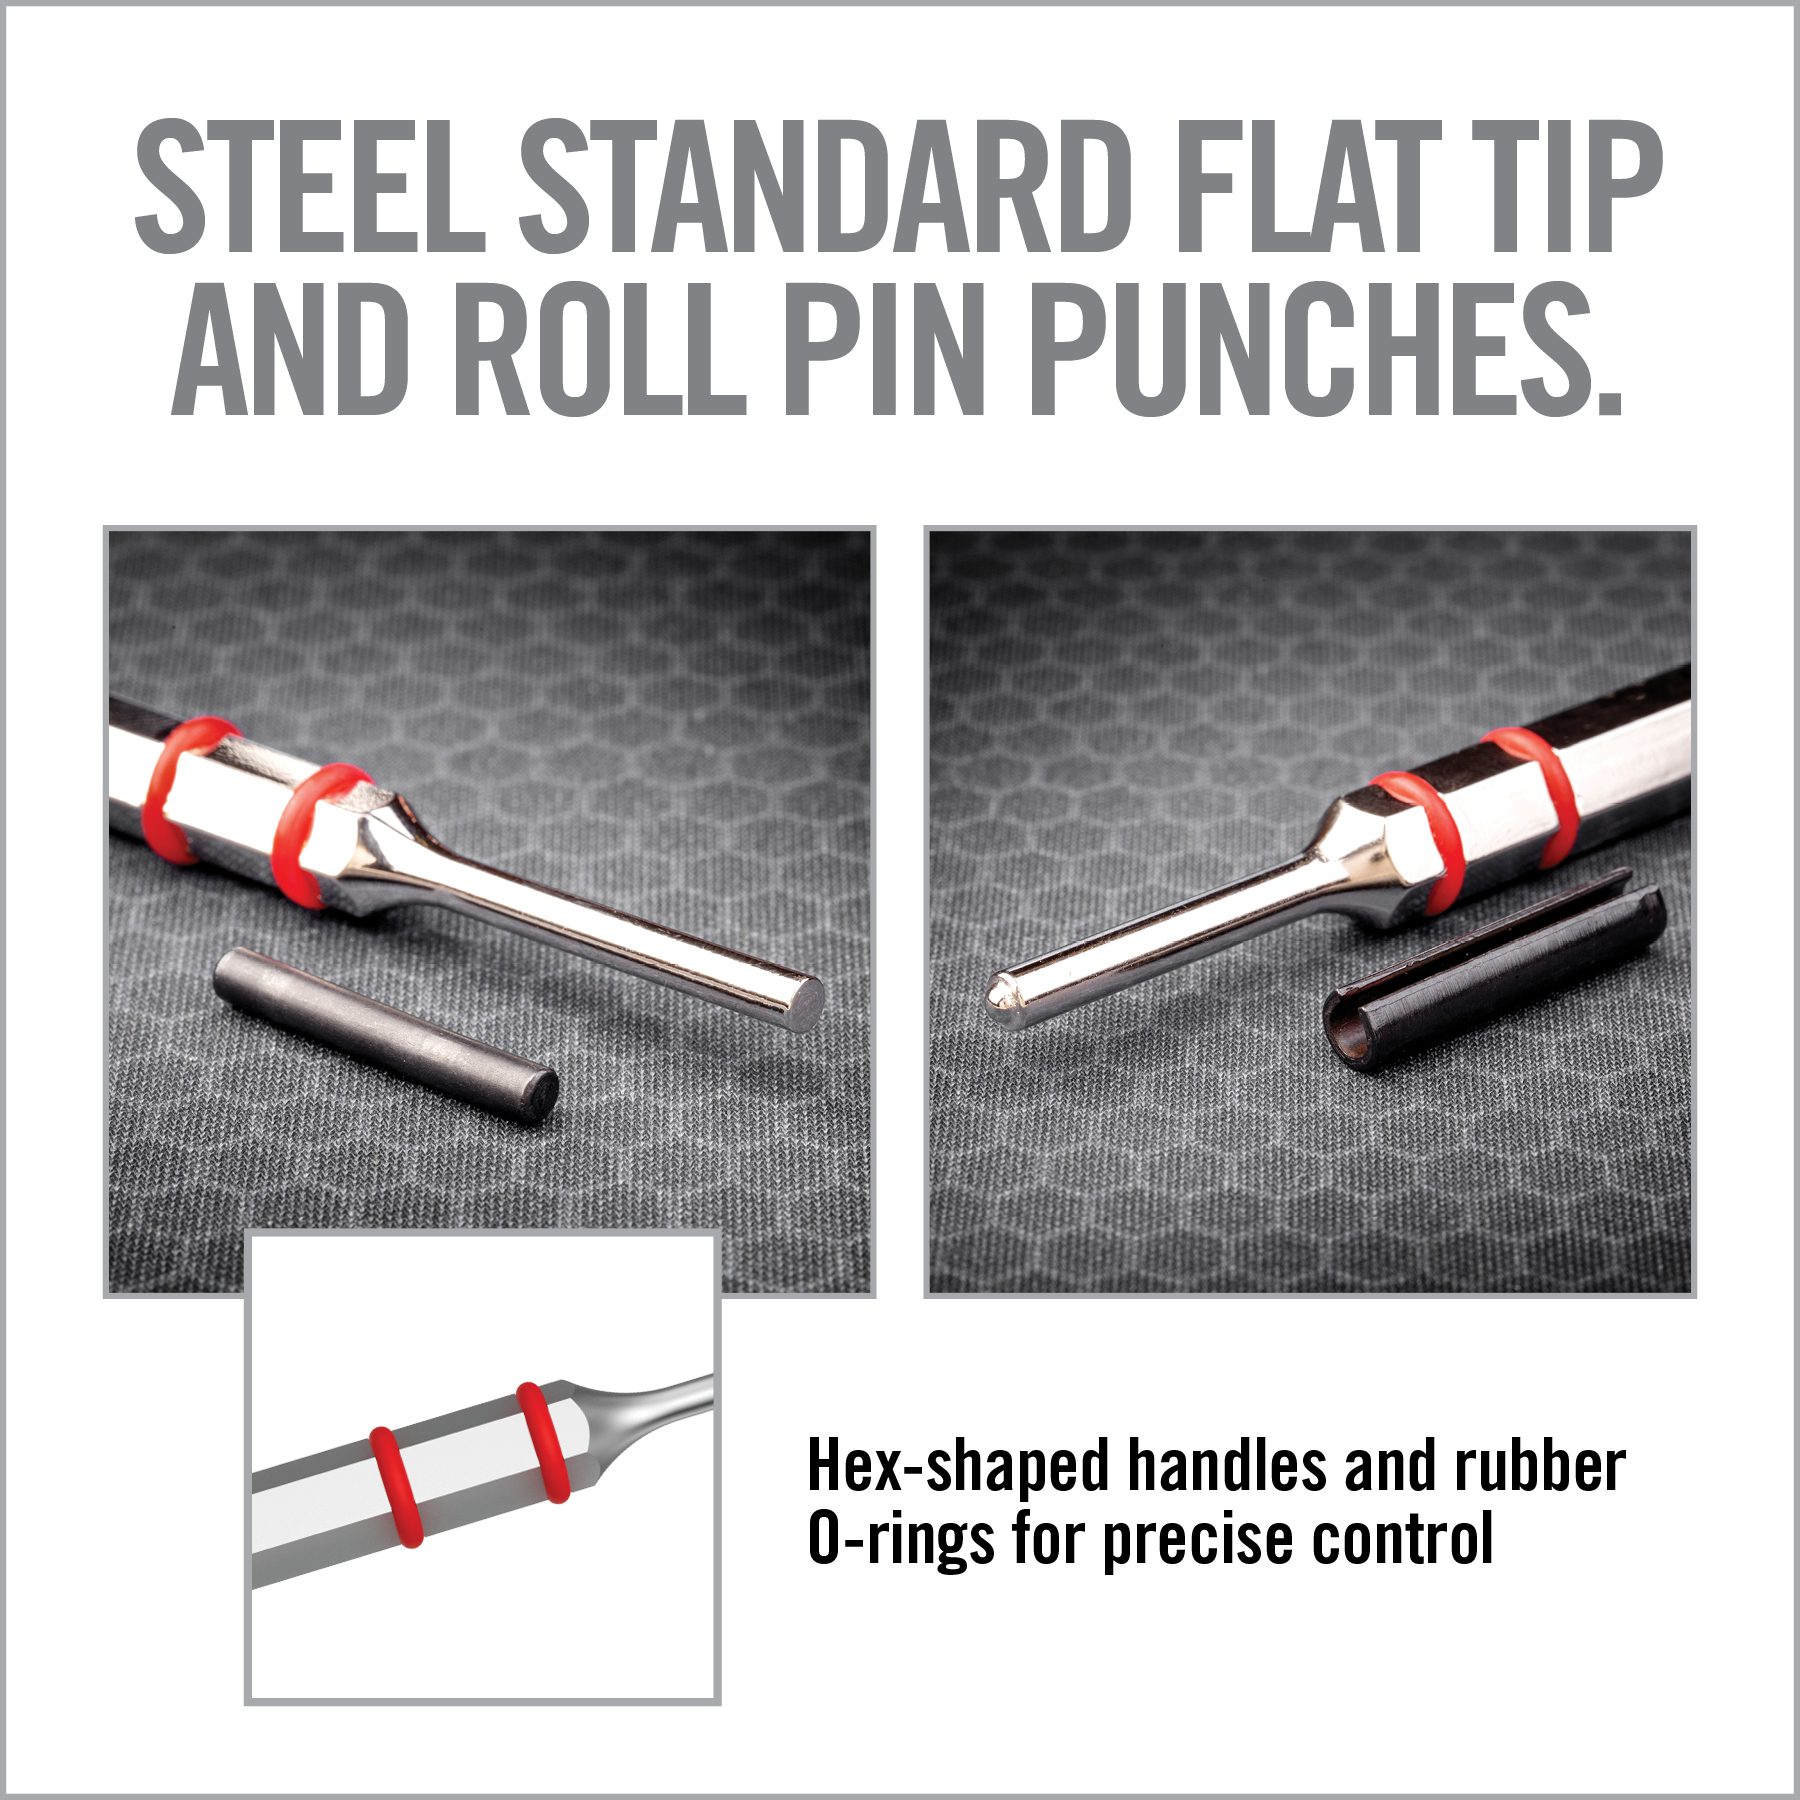 the instructions for how to use a steel - plated flat tip and roll pin punches